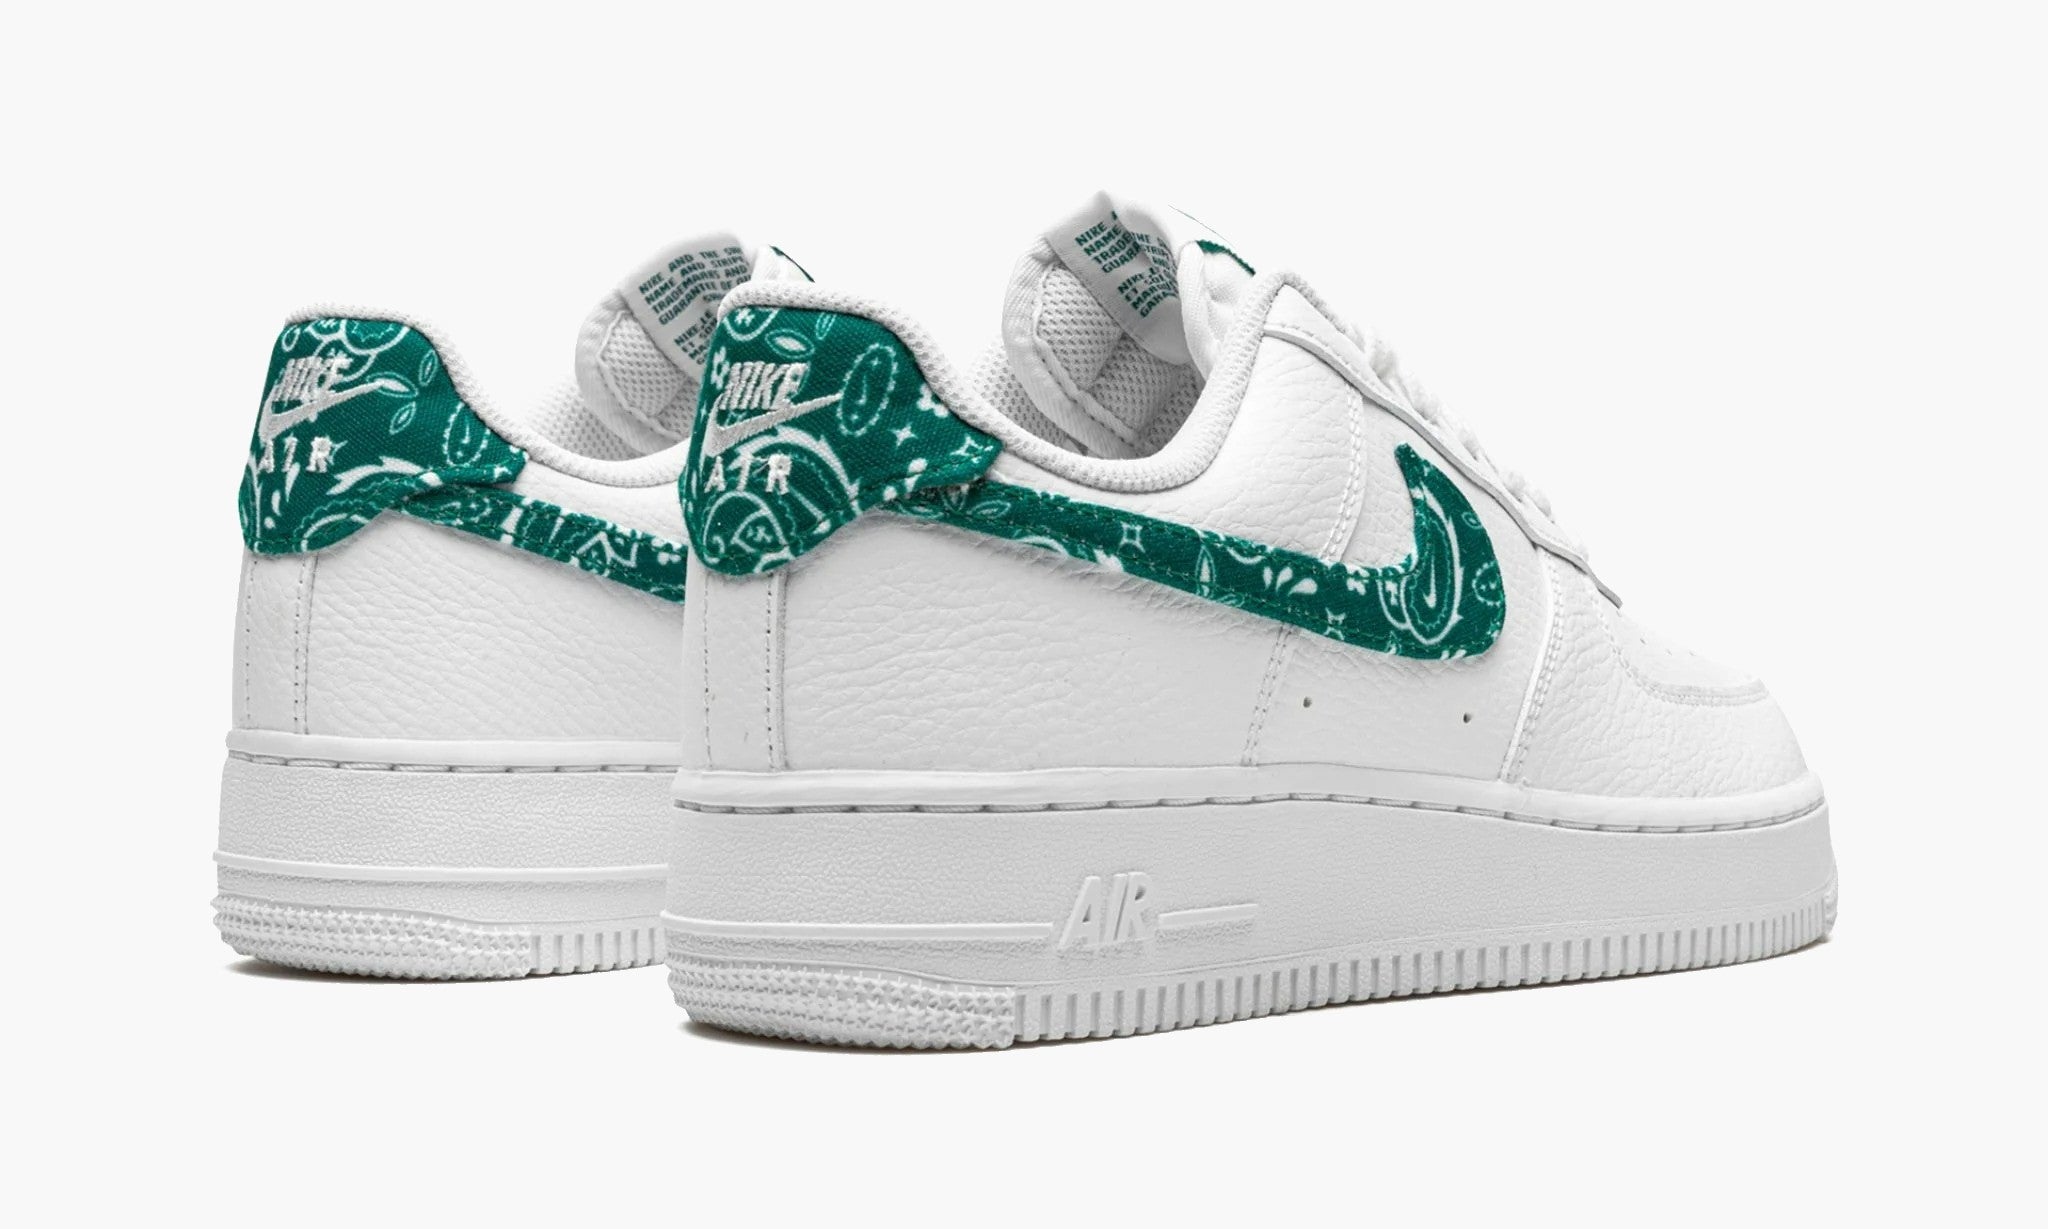 Air Force 1 LowEssential "Green Paisley